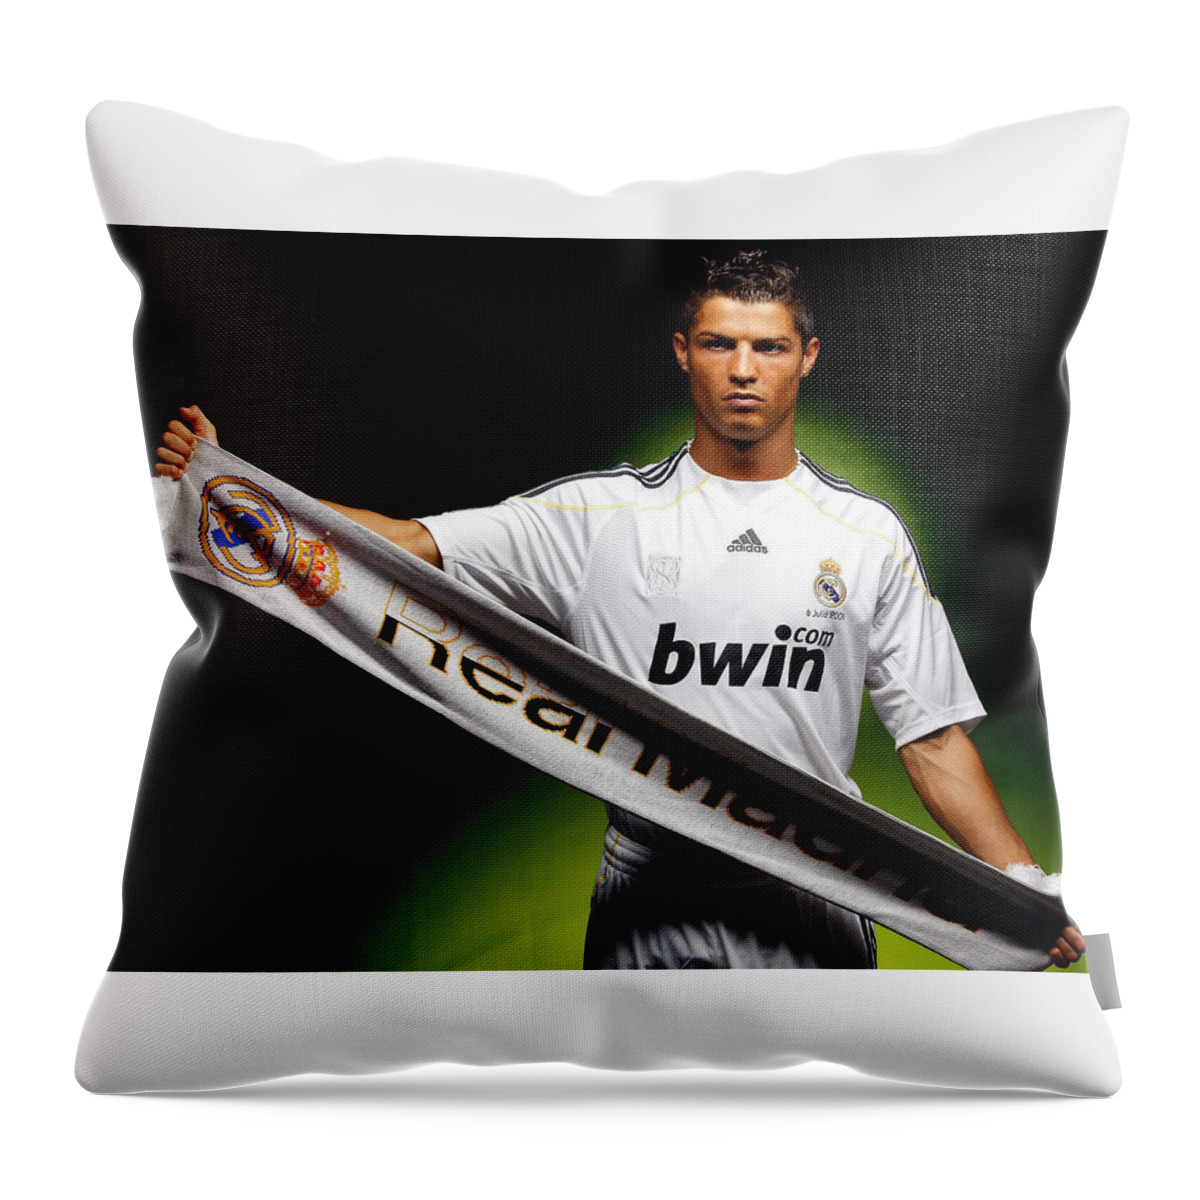 Cristiano Ronaldo Throw Pillow featuring the photograph Cristiano Ronaldo by Jackie Russo